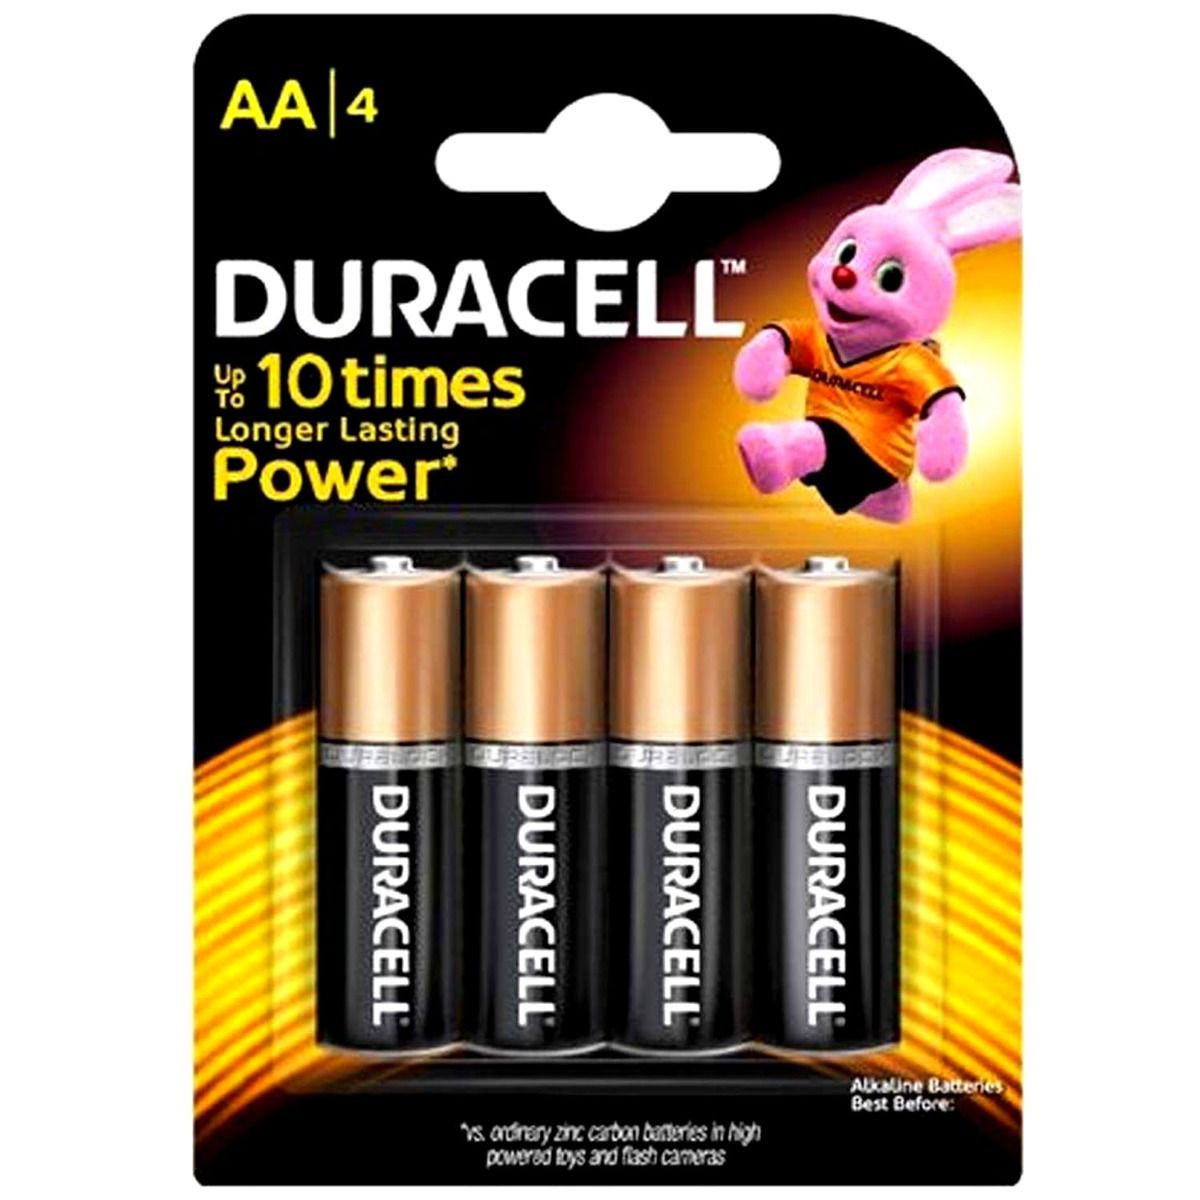 Duracell proce